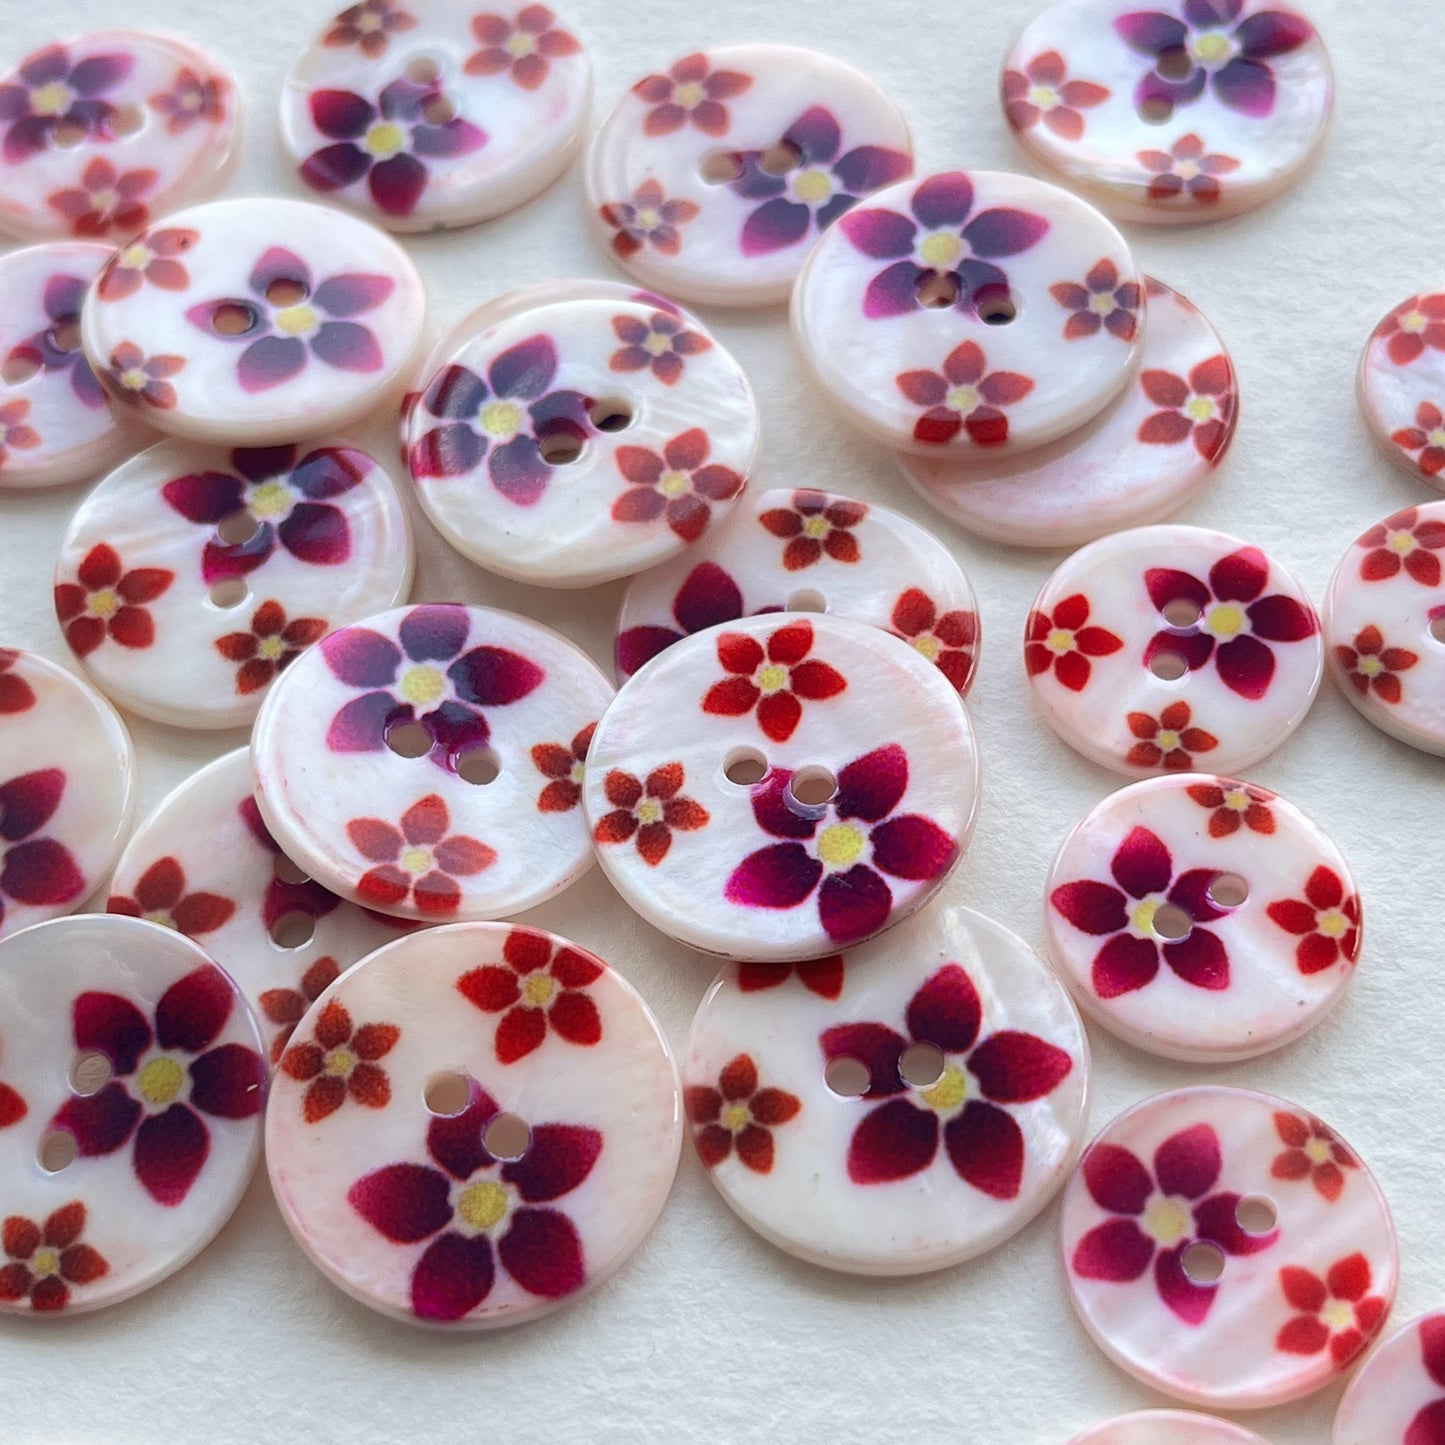 pretty lacquered Agoya shell buttons with floral design in red and pink. Deadstock haberdashery. Choose our range of vintage buttons, trims & sewing accoutrement rescued from a London haberdasher. Sew sustainably.